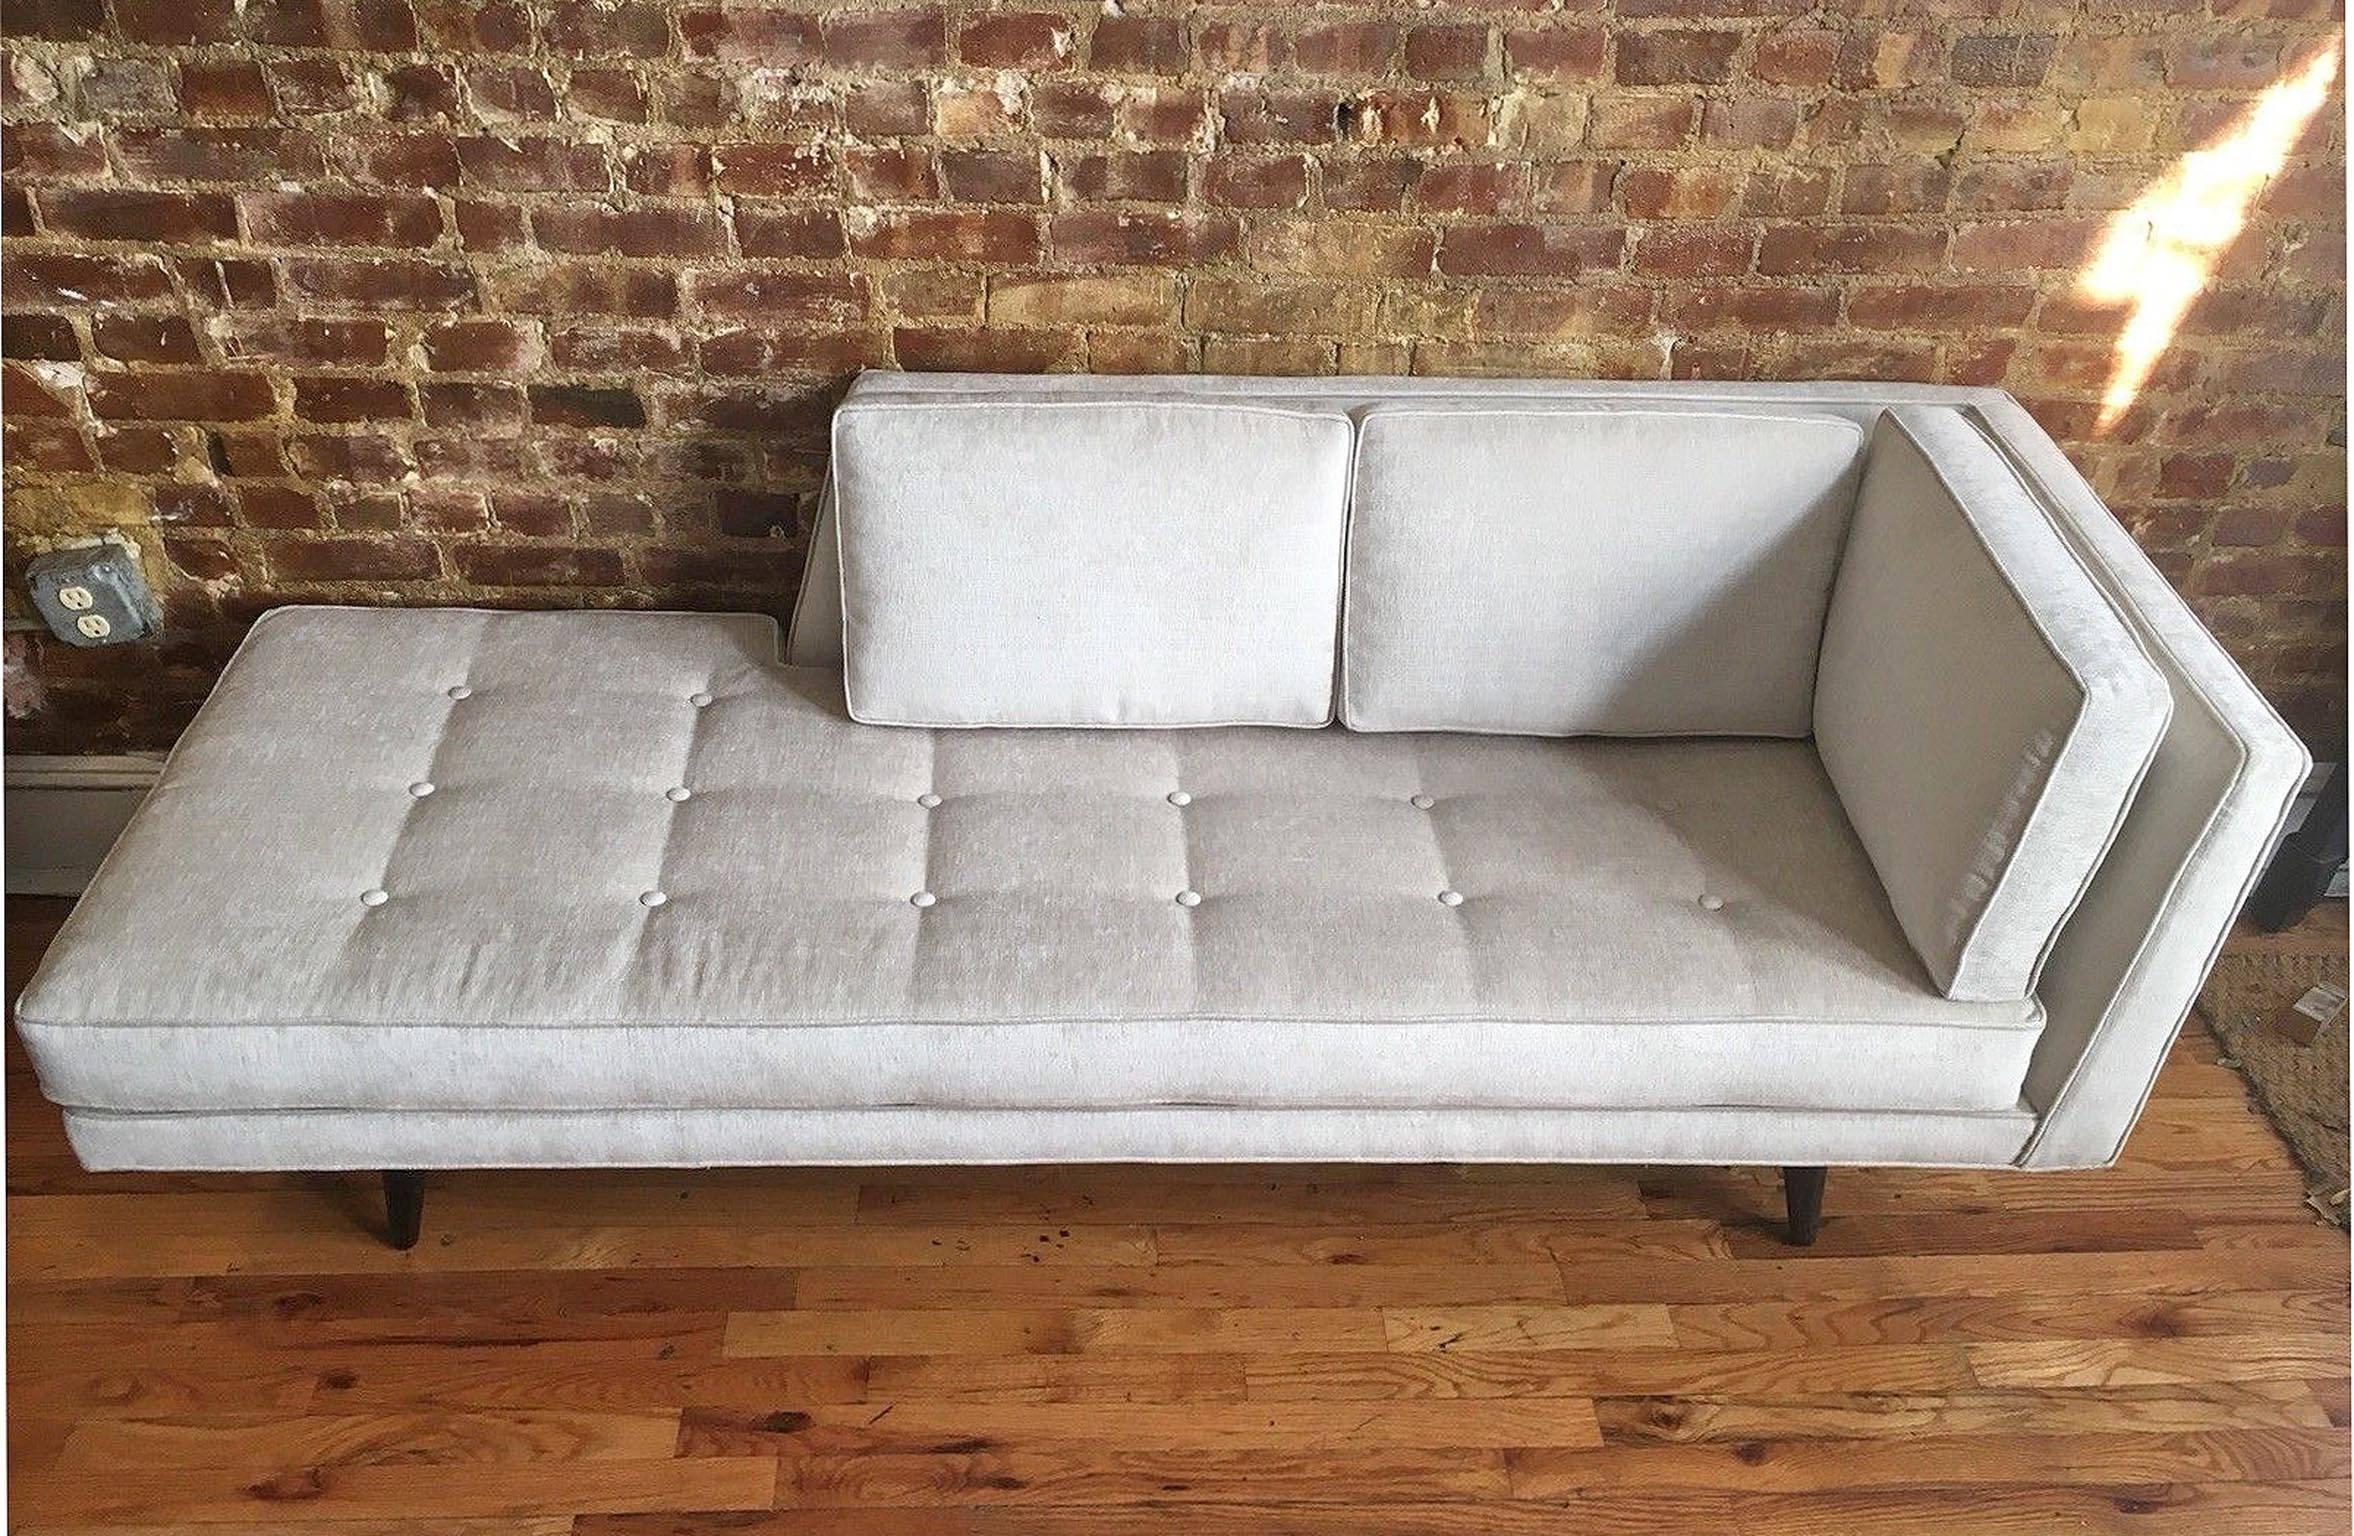 Designer Edward Wormley for Dunbar white velvet chaise lounge #5525 beautiful sofa / daybed Mid-Century Modern
Professionally restored with white Knoll Summit velvet upholstery to the original upholstery design from Dunbar
Base is solid wood -